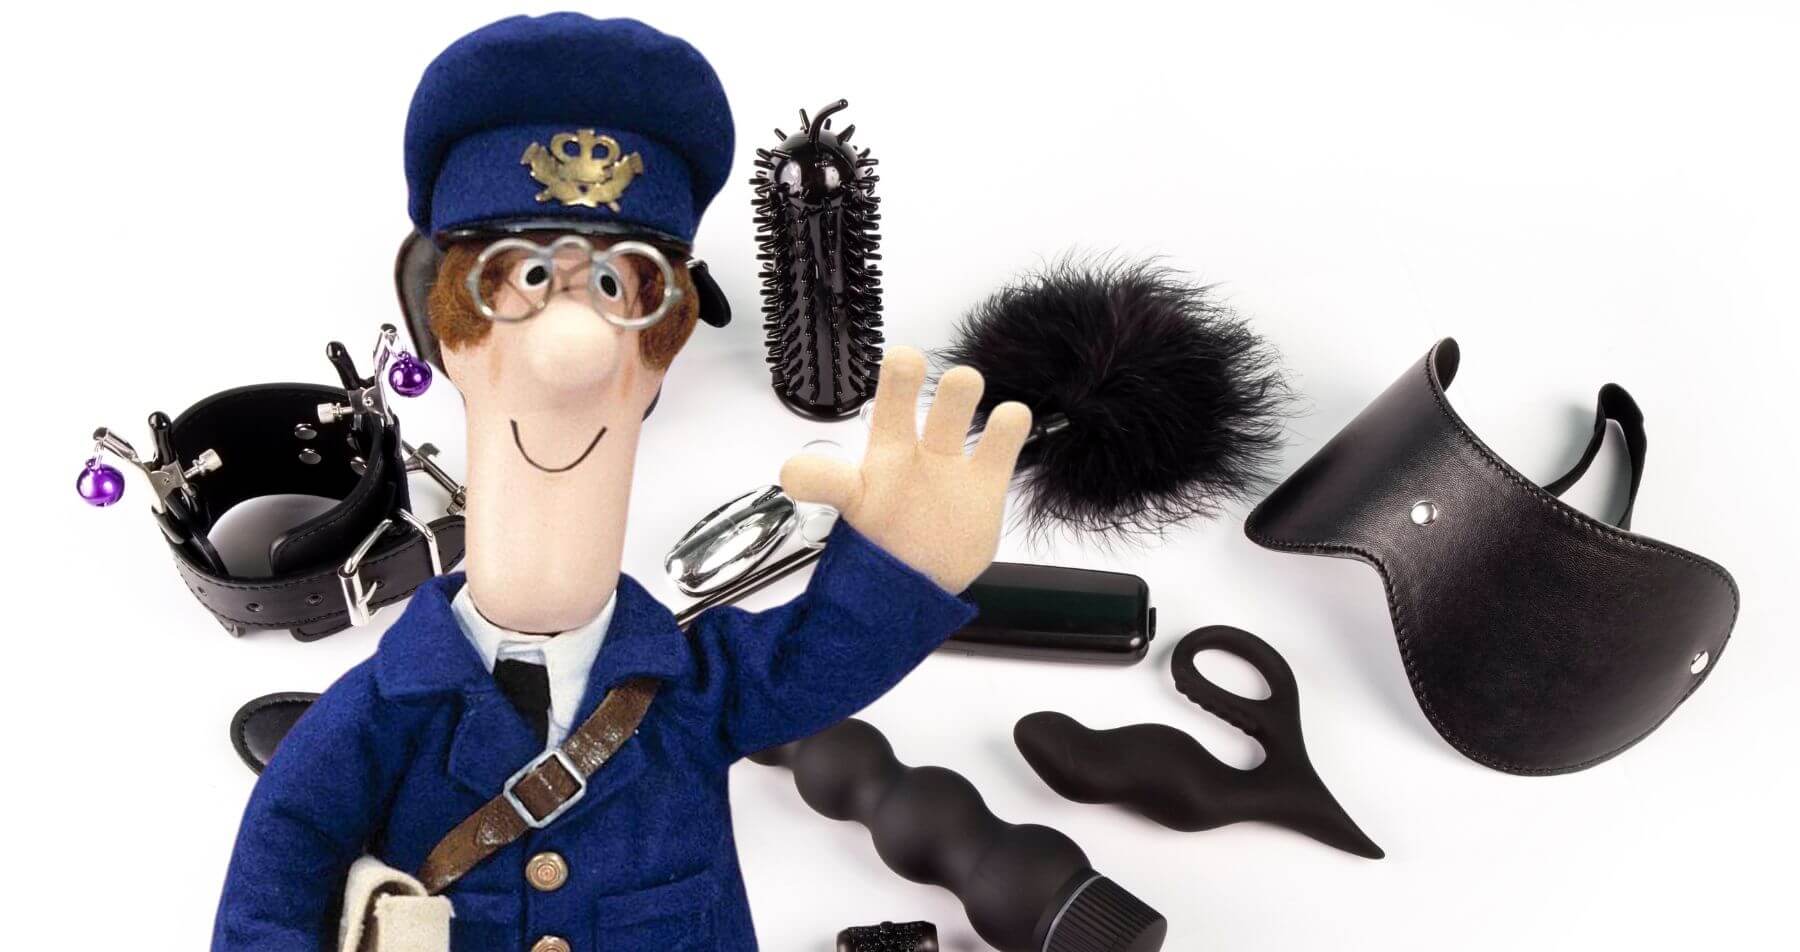 Postman Pat stood in front of some black and white sex toys.